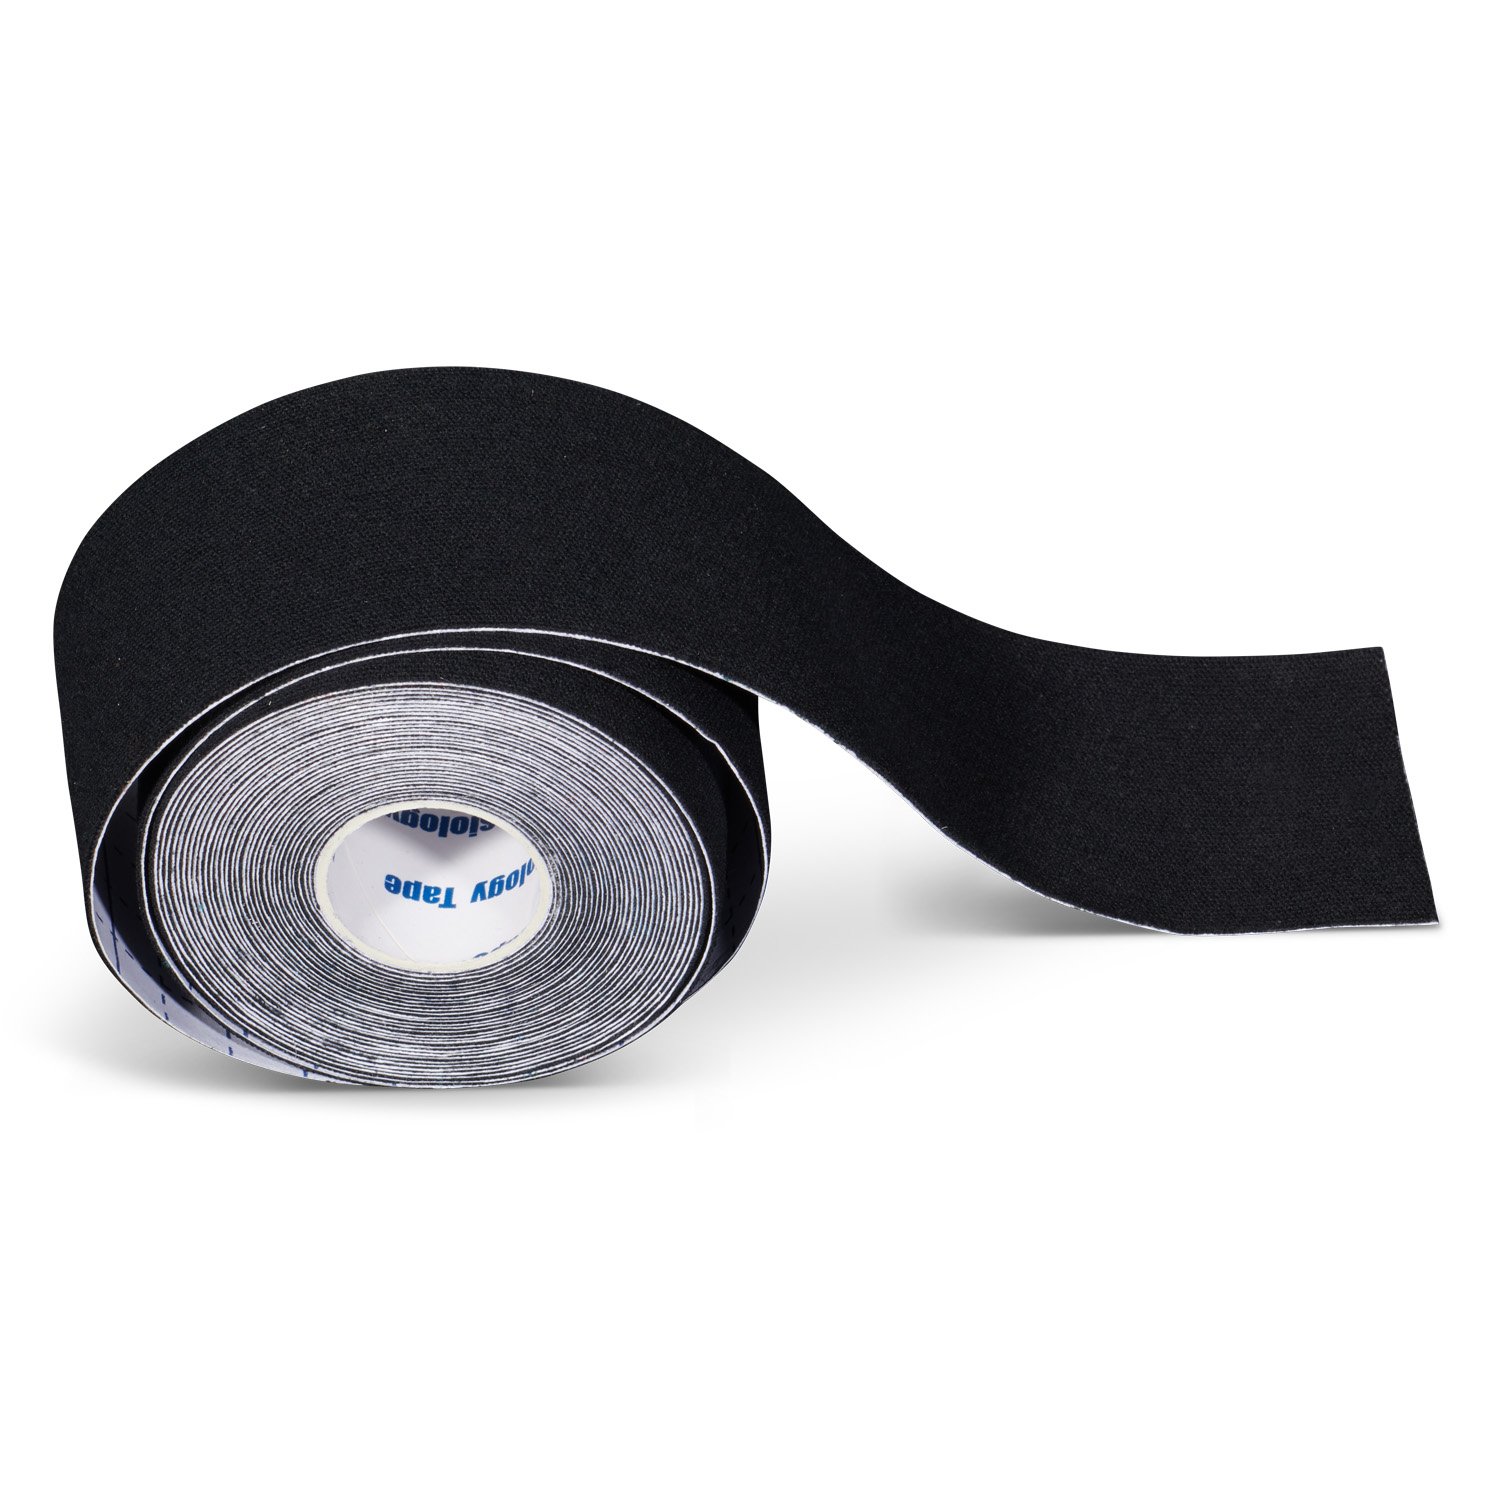 kinesiology tape 4 rolls plus 1 roll for free black